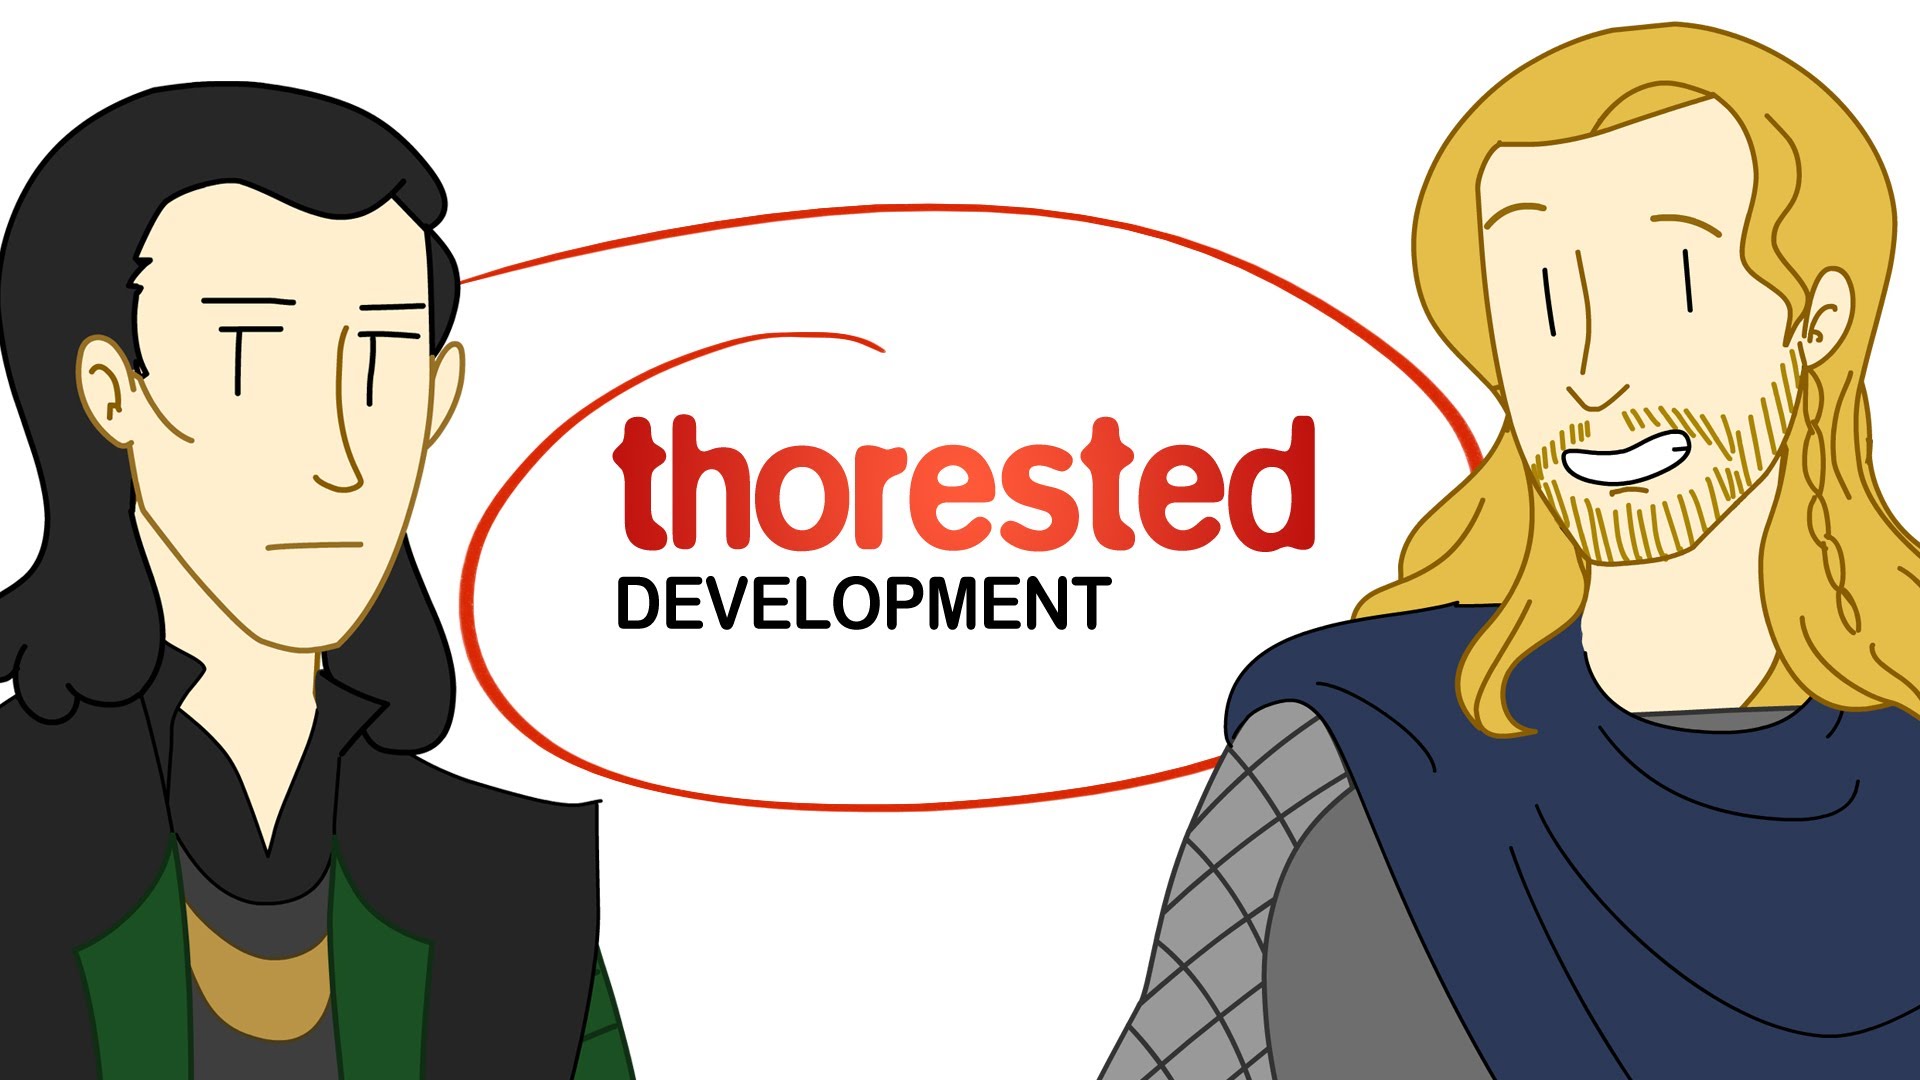 When Thor meets Arrested Development: Thorested Development